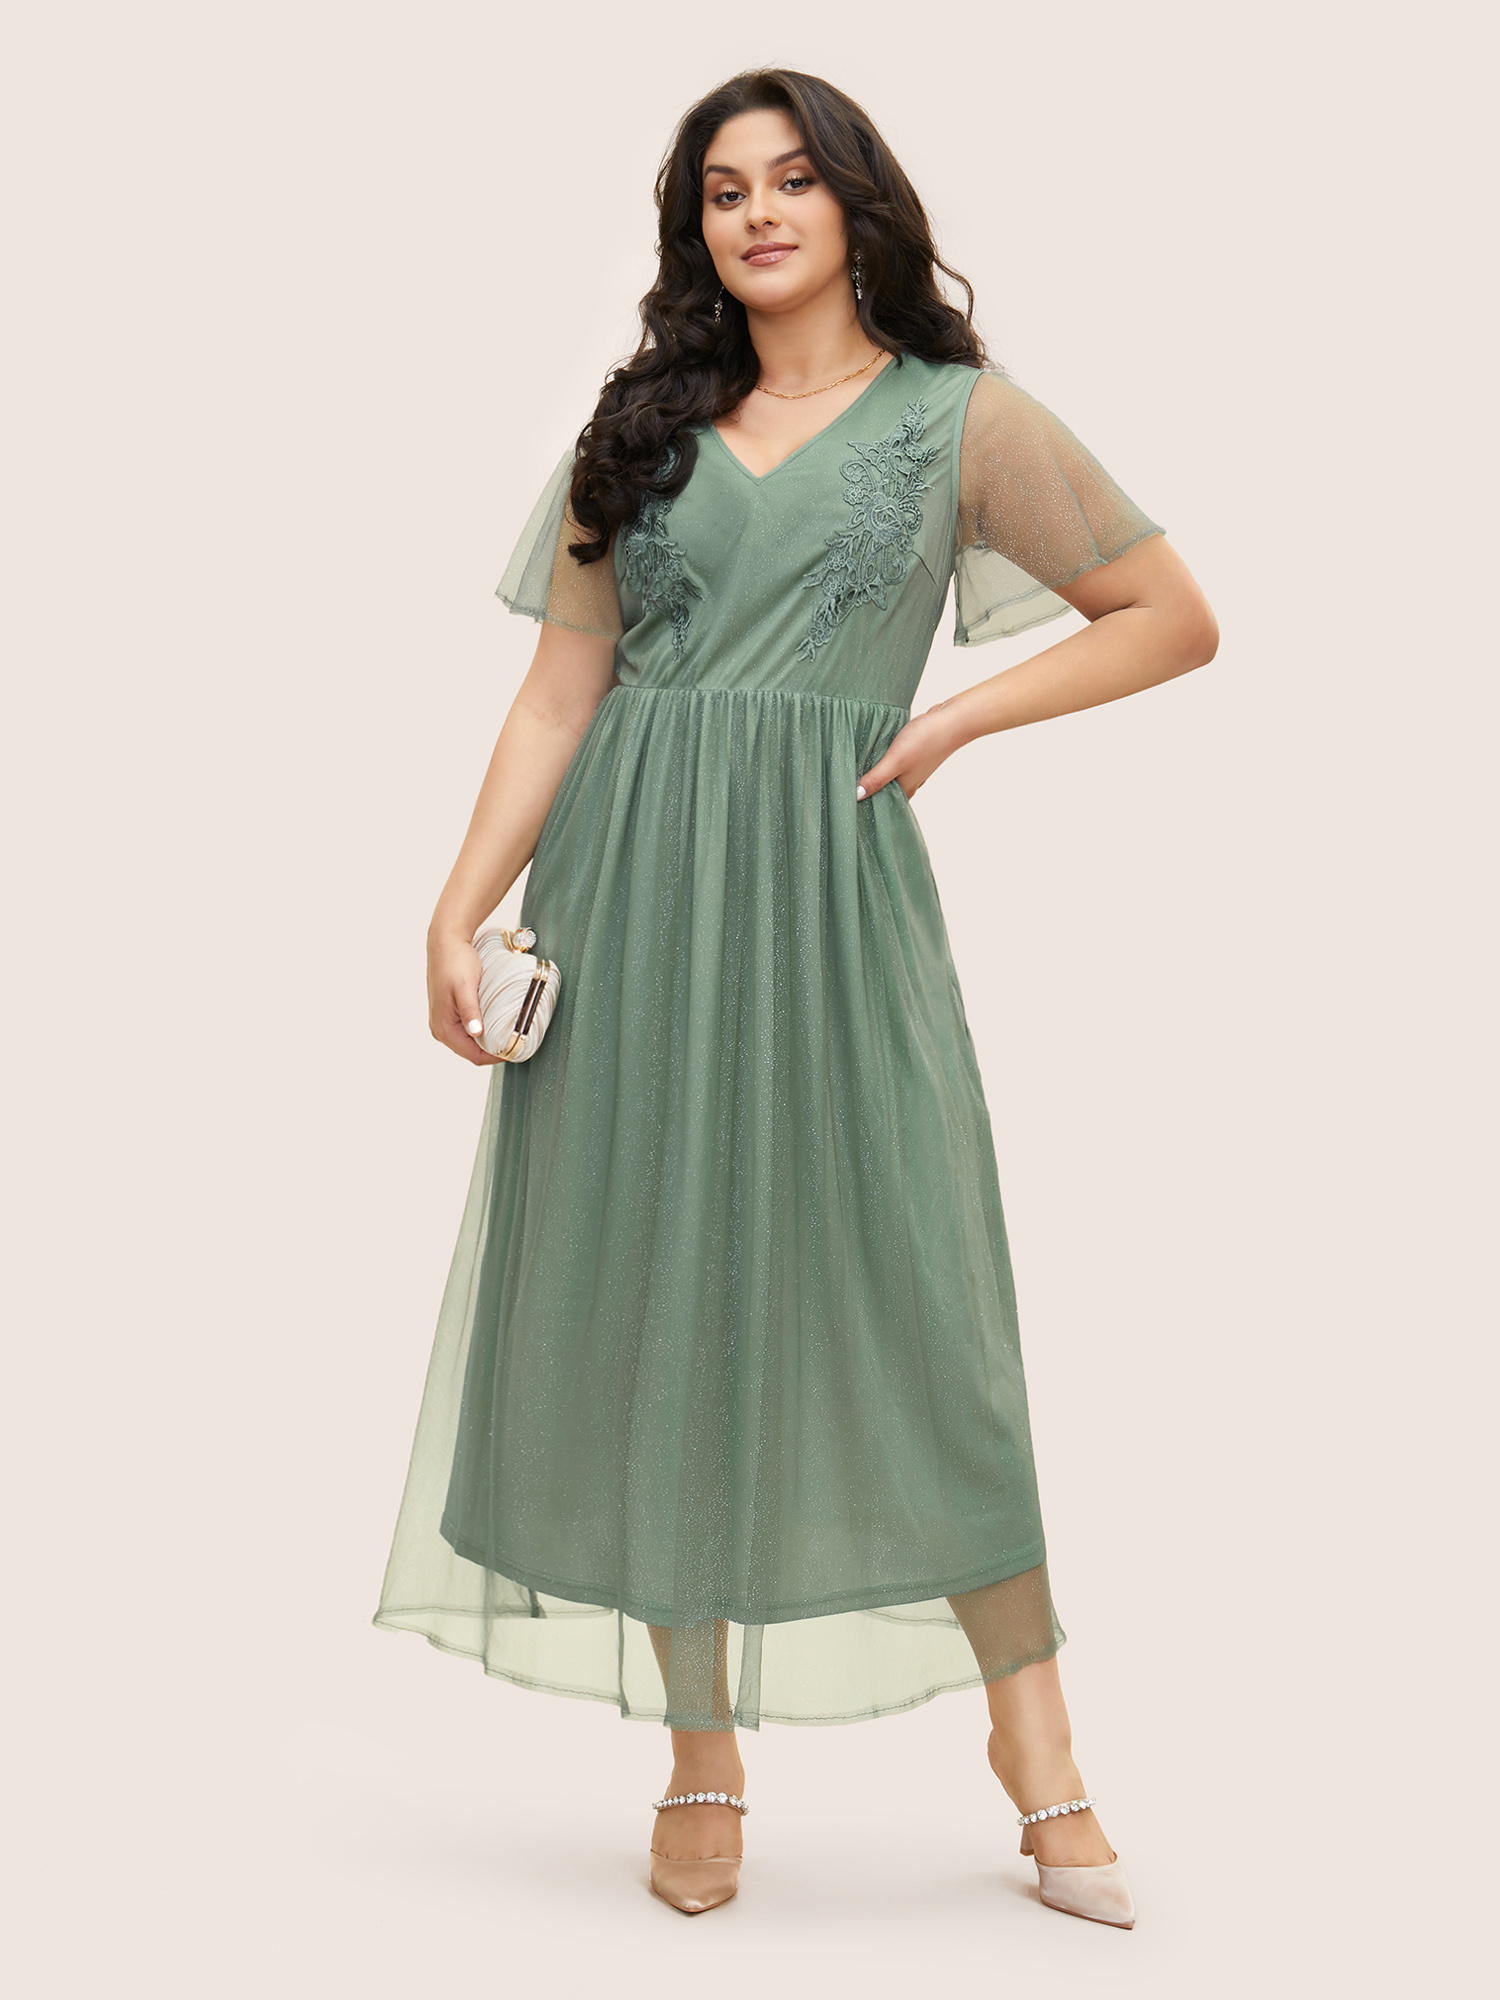 

Plus Size Floral Embroidered Mesh Ruffle Sleeve Dress Emerald Women Formal Woven ribbon&lace trim V-neck Short sleeve Curvy BloomChic